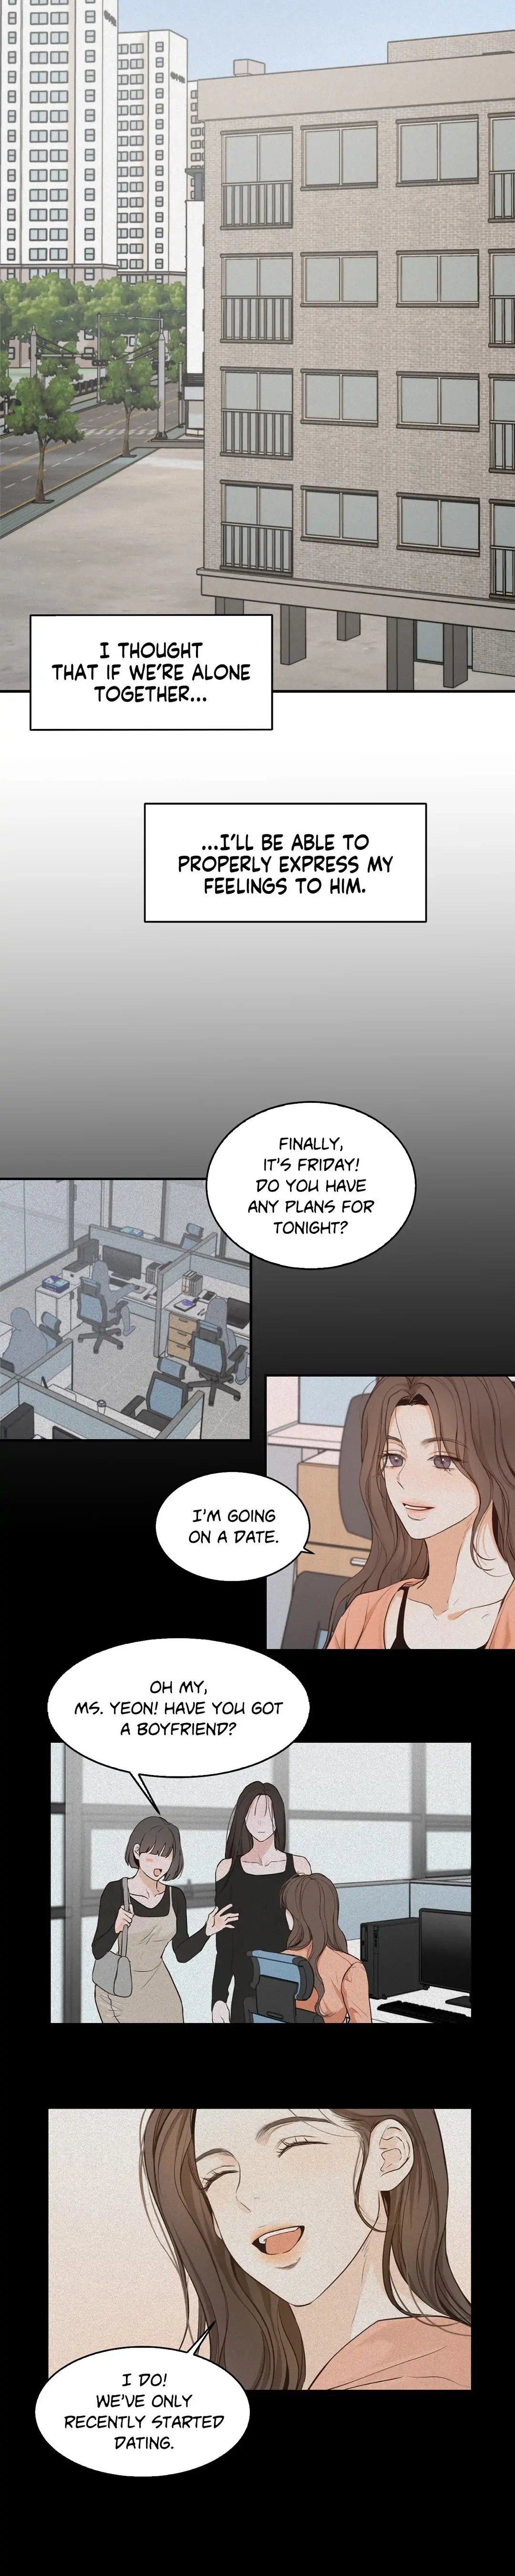 the-men-in-my-bed-chap-40-11